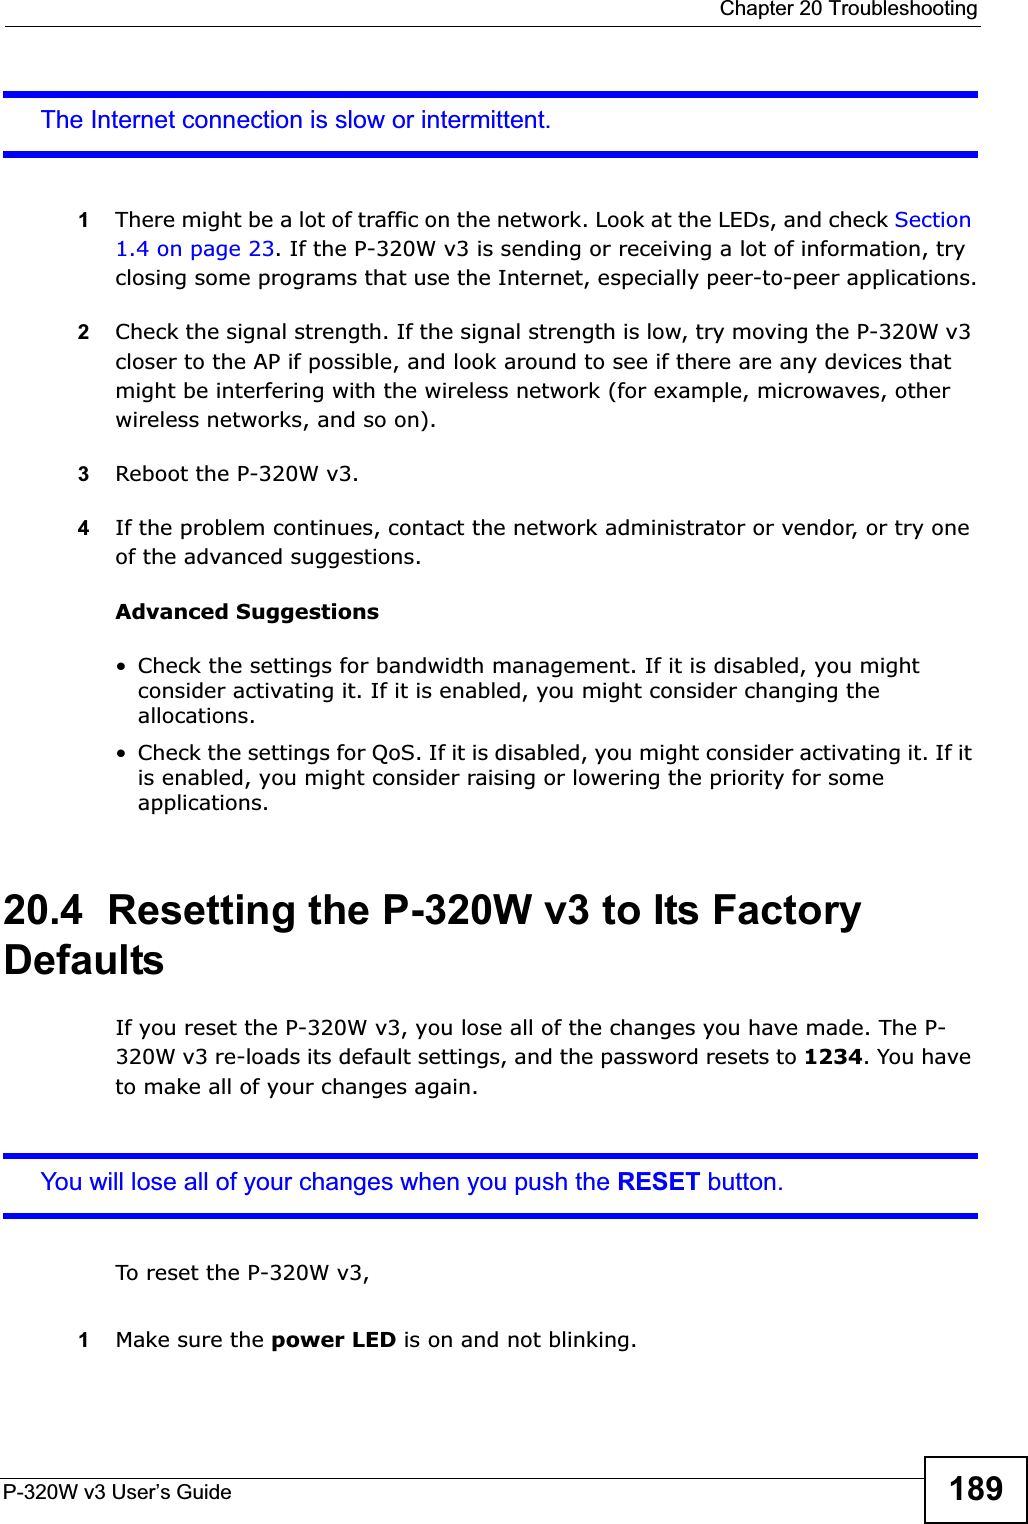  Chapter 20 TroubleshootingP-320W v3 User’s Guide 189The Internet connection is slow or intermittent.1There might be a lot of traffic on the network. Look at the LEDs, and check Section 1.4 on page 23. If the P-320W v3 is sending or receiving a lot of information, try closing some programs that use the Internet, especially peer-to-peer applications.2Check the signal strength. If the signal strength is low, try moving the P-320W v3 closer to the AP if possible, and look around to see if there are any devices that might be interfering with the wireless network (for example, microwaves, other wireless networks, and so on).3Reboot the P-320W v3.4If the problem continues, contact the network administrator or vendor, or try one of the advanced suggestions.Advanced Suggestions• Check the settings for bandwidth management. If it is disabled, you might consider activating it. If it is enabled, you might consider changing the allocations. • Check the settings for QoS. If it is disabled, you might consider activating it. If it is enabled, you might consider raising or lowering the priority for some applications.20.4  Resetting the P-320W v3 to Its Factory Defaults If you reset the P-320W v3, you lose all of the changes you have made. The P-320W v3 re-loads its default settings, and the password resets to 1234. You have to make all of your changes again.You will lose all of your changes when you push the RESET button.To reset the P-320W v3,1Make sure the power LED is on and not blinking. 